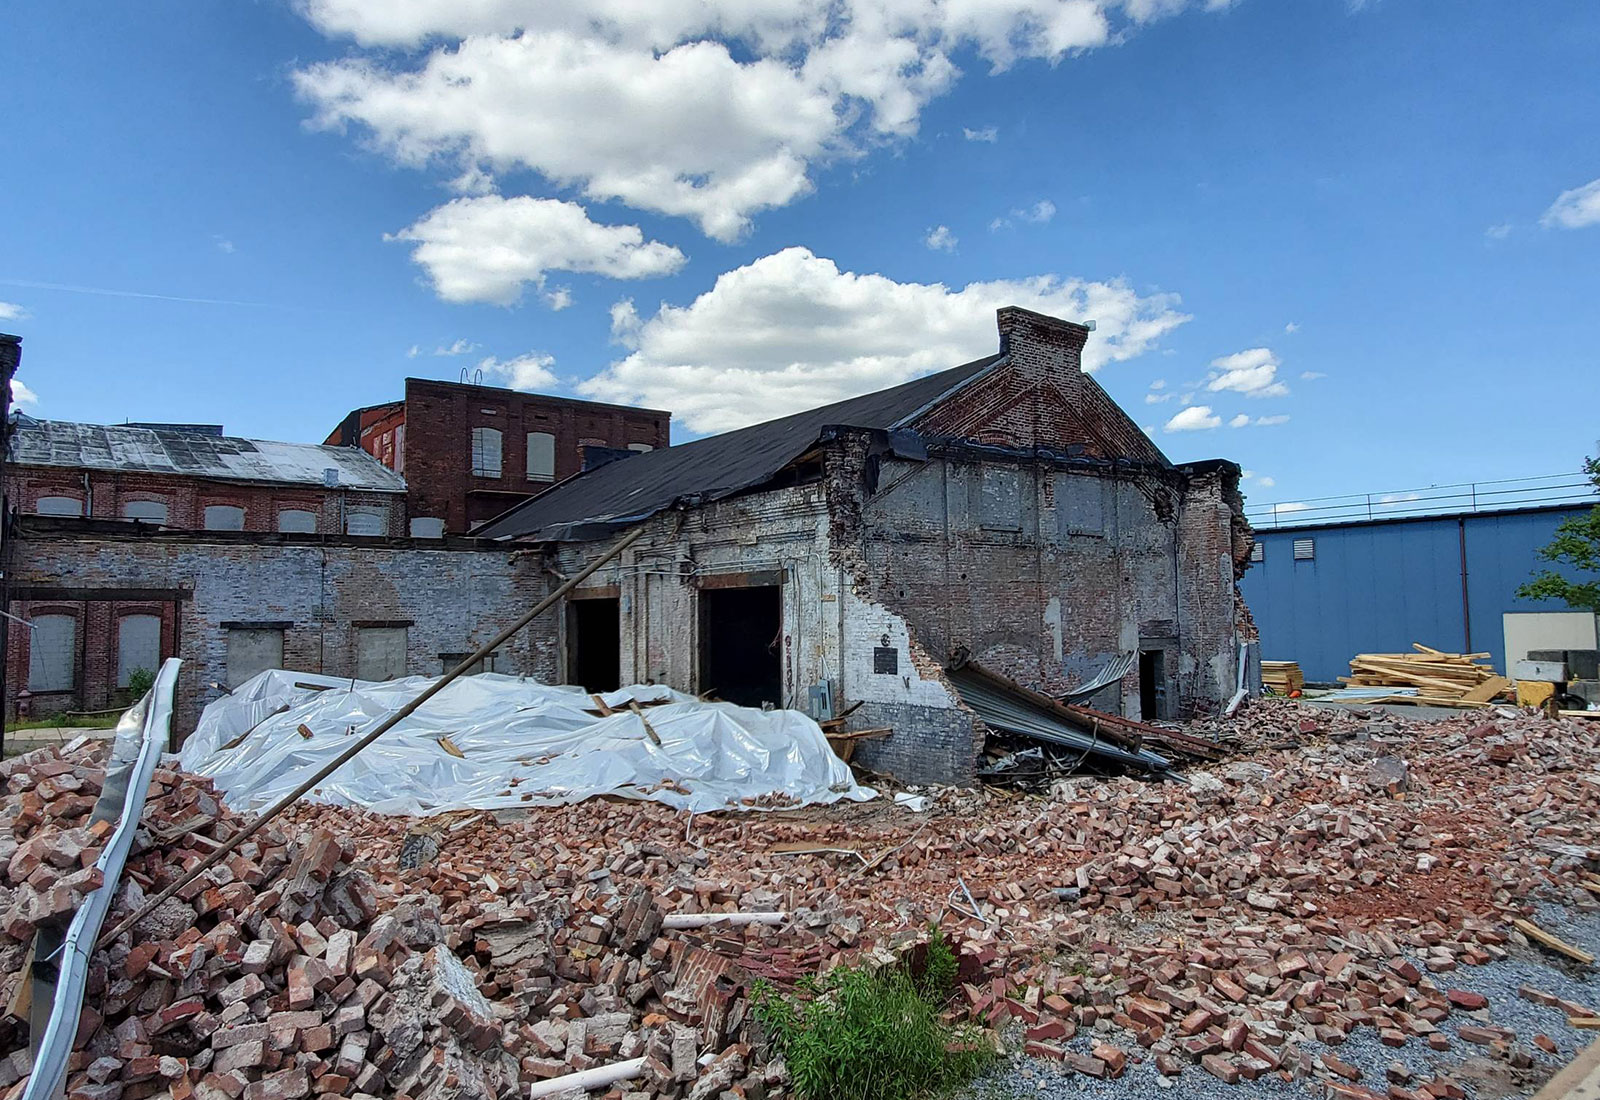 Partially demolished historic factory with some buildings still standing surrounded by piles of brick and shards of wood